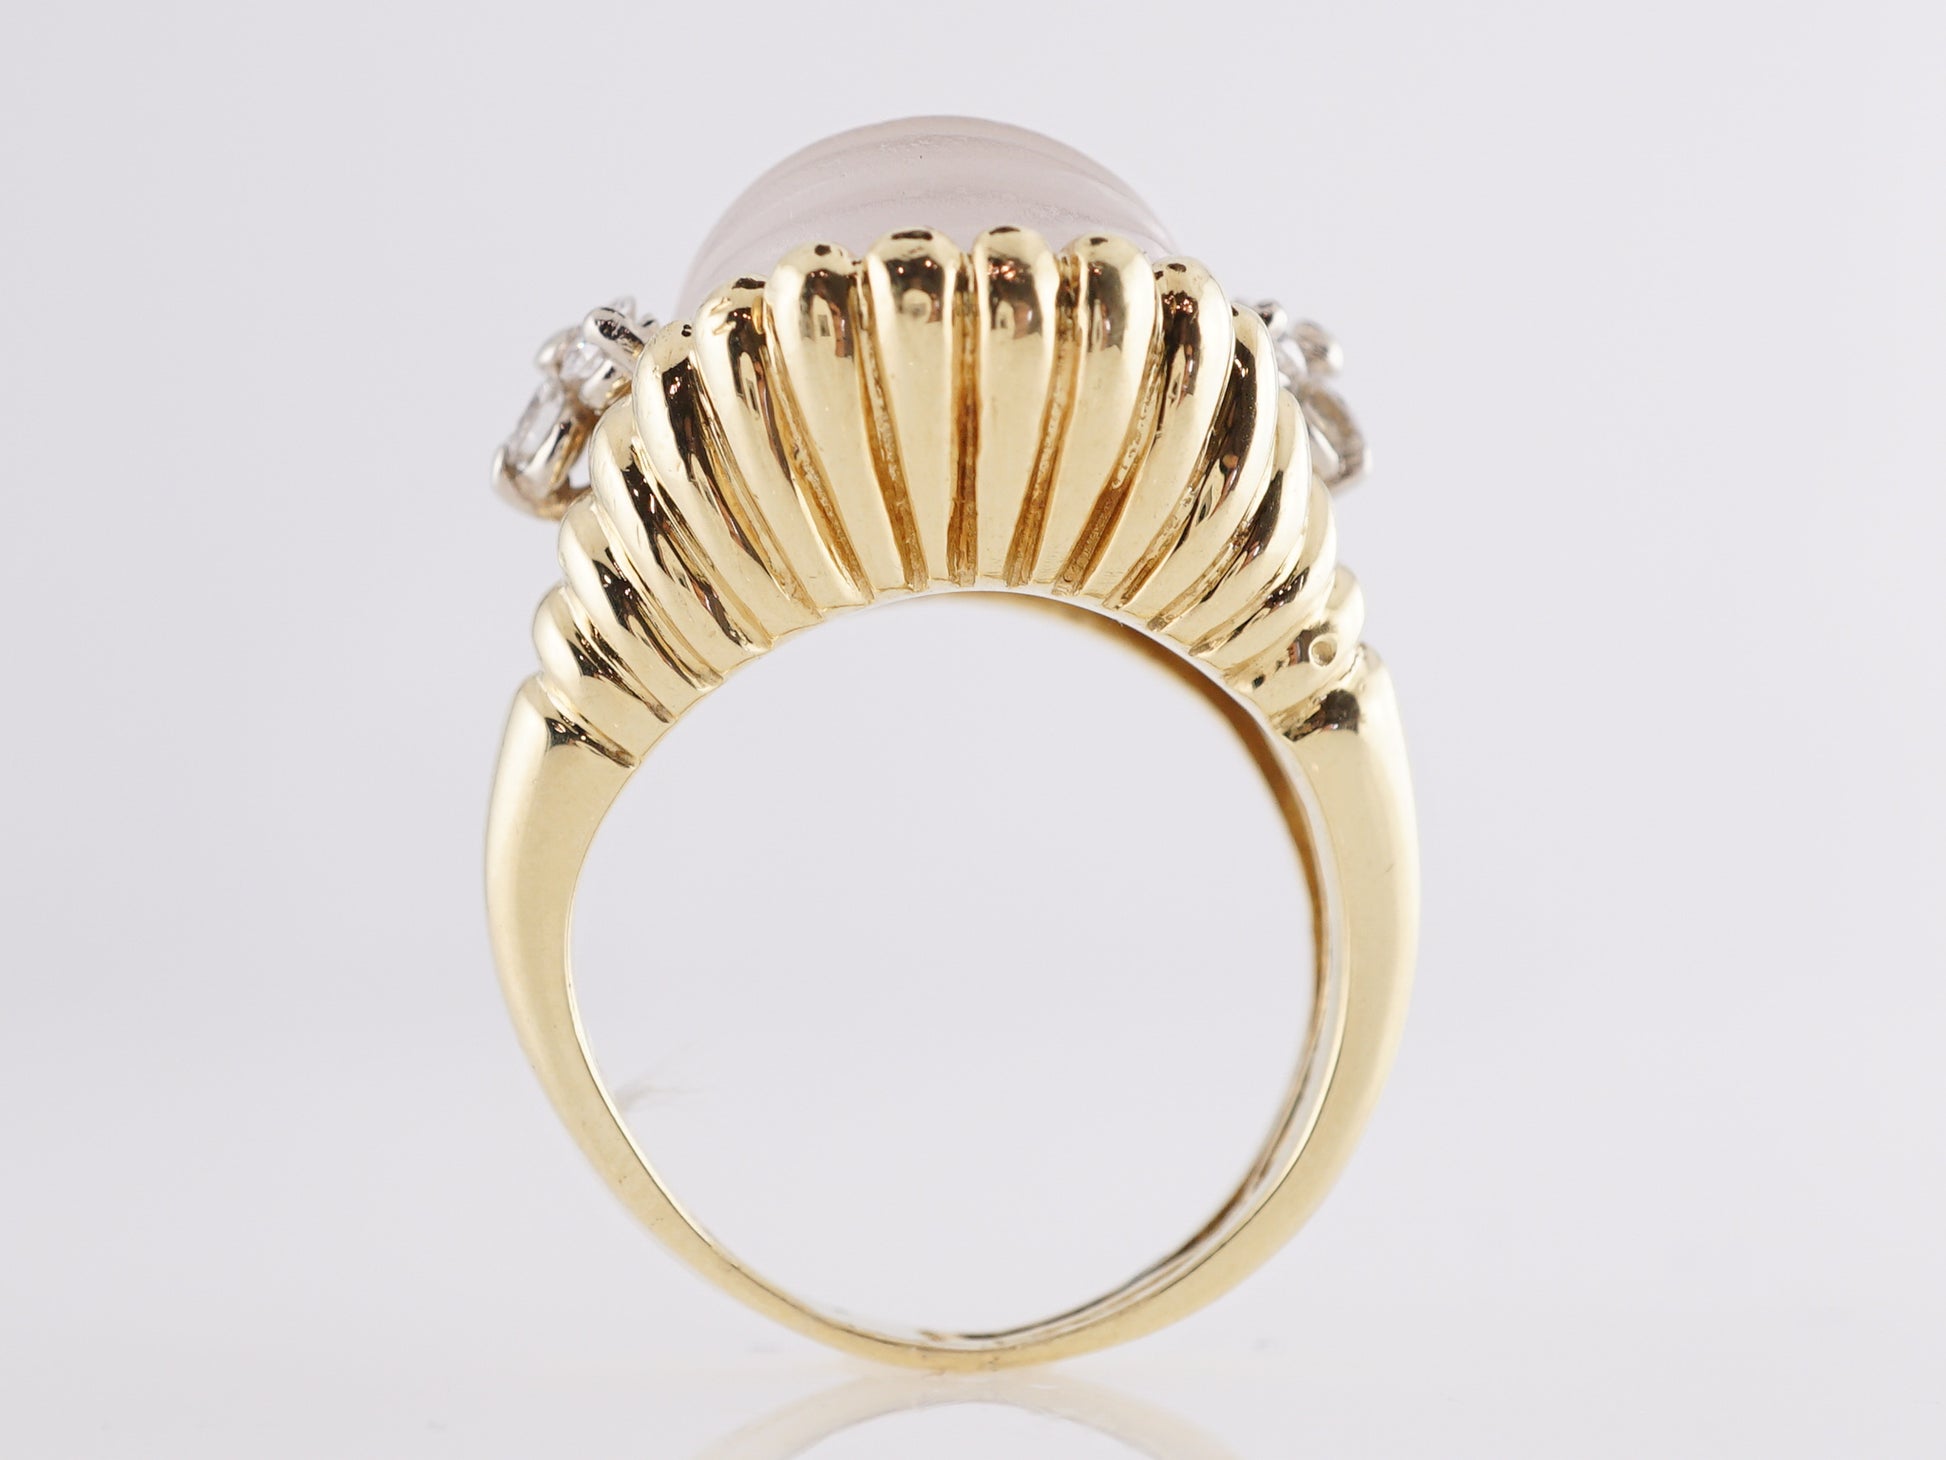 Frosted Quartz Cocktail Ring with Diamond Accents in 18kComposition: 18 Karat Yellow Gold Ring Size: 5.75 Total Diamond Weight: .36ct Total Gram Weight: 13.8 g Inscription: 18K
      